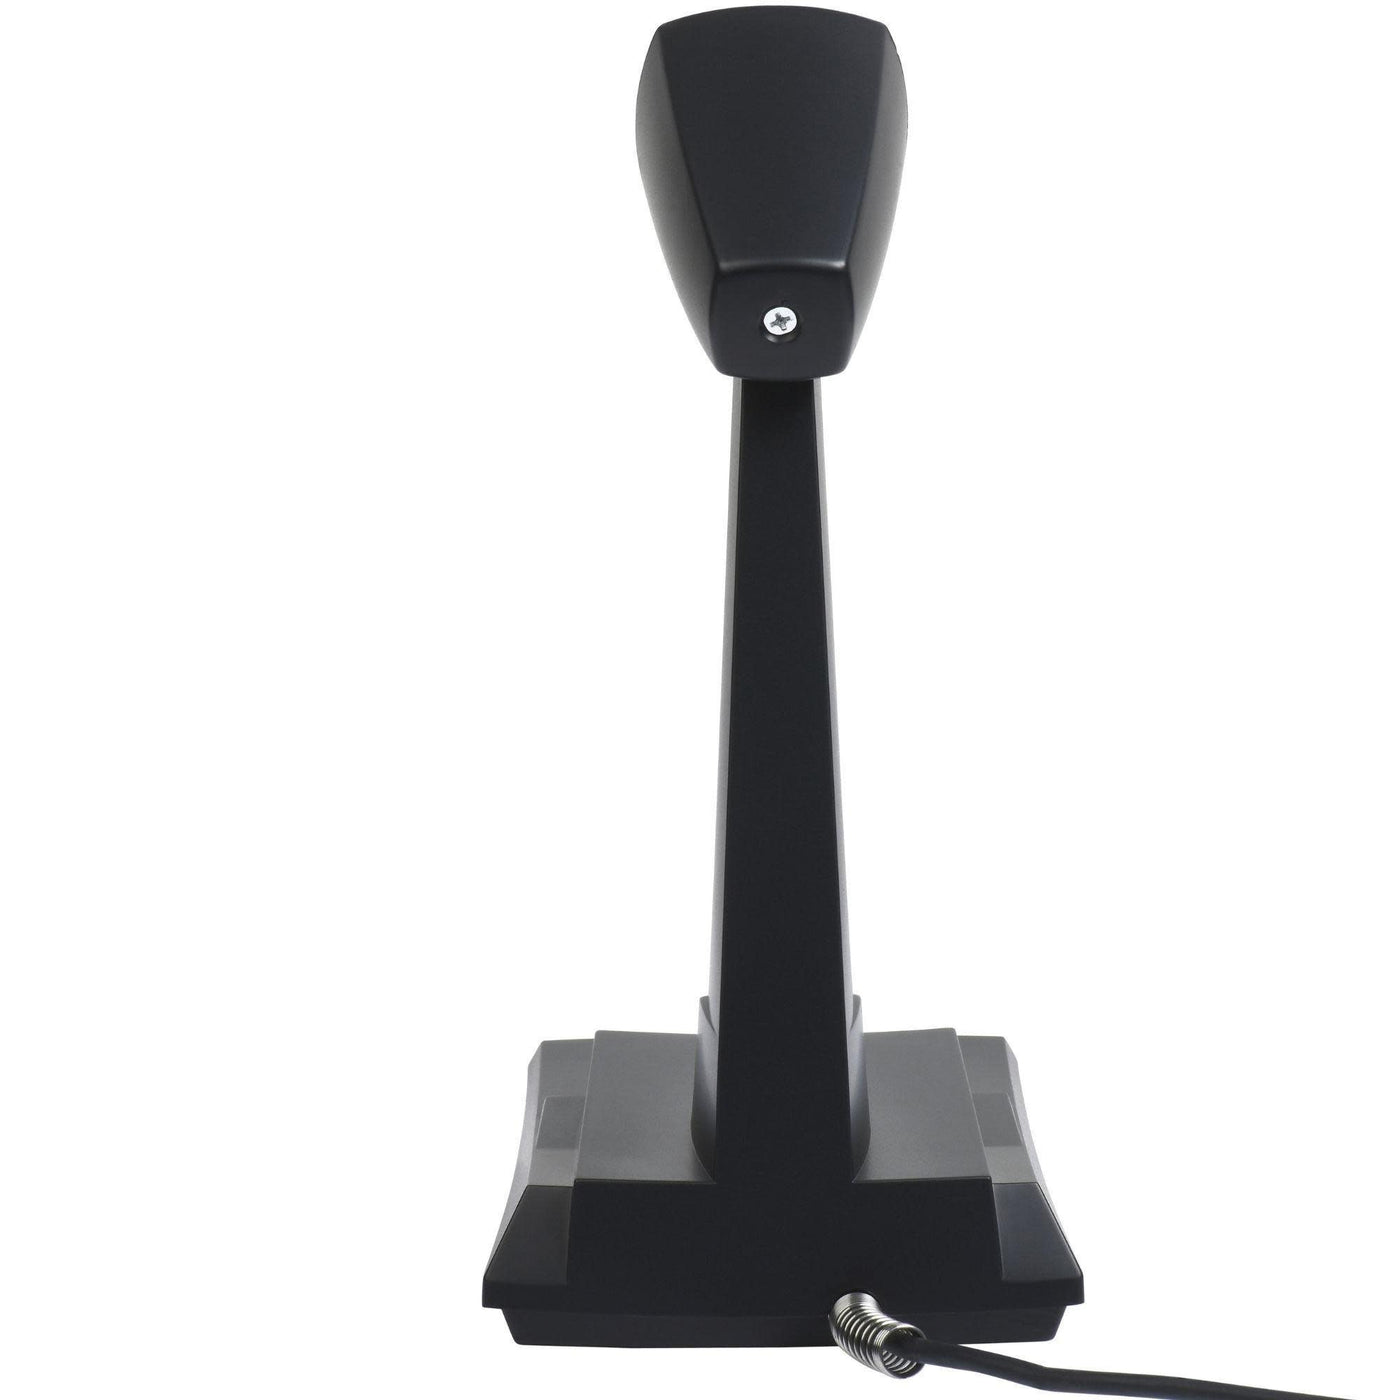 Astatic 878HL-2 Desktop Omnidirectional Dynamic Microphone with Push to Talk